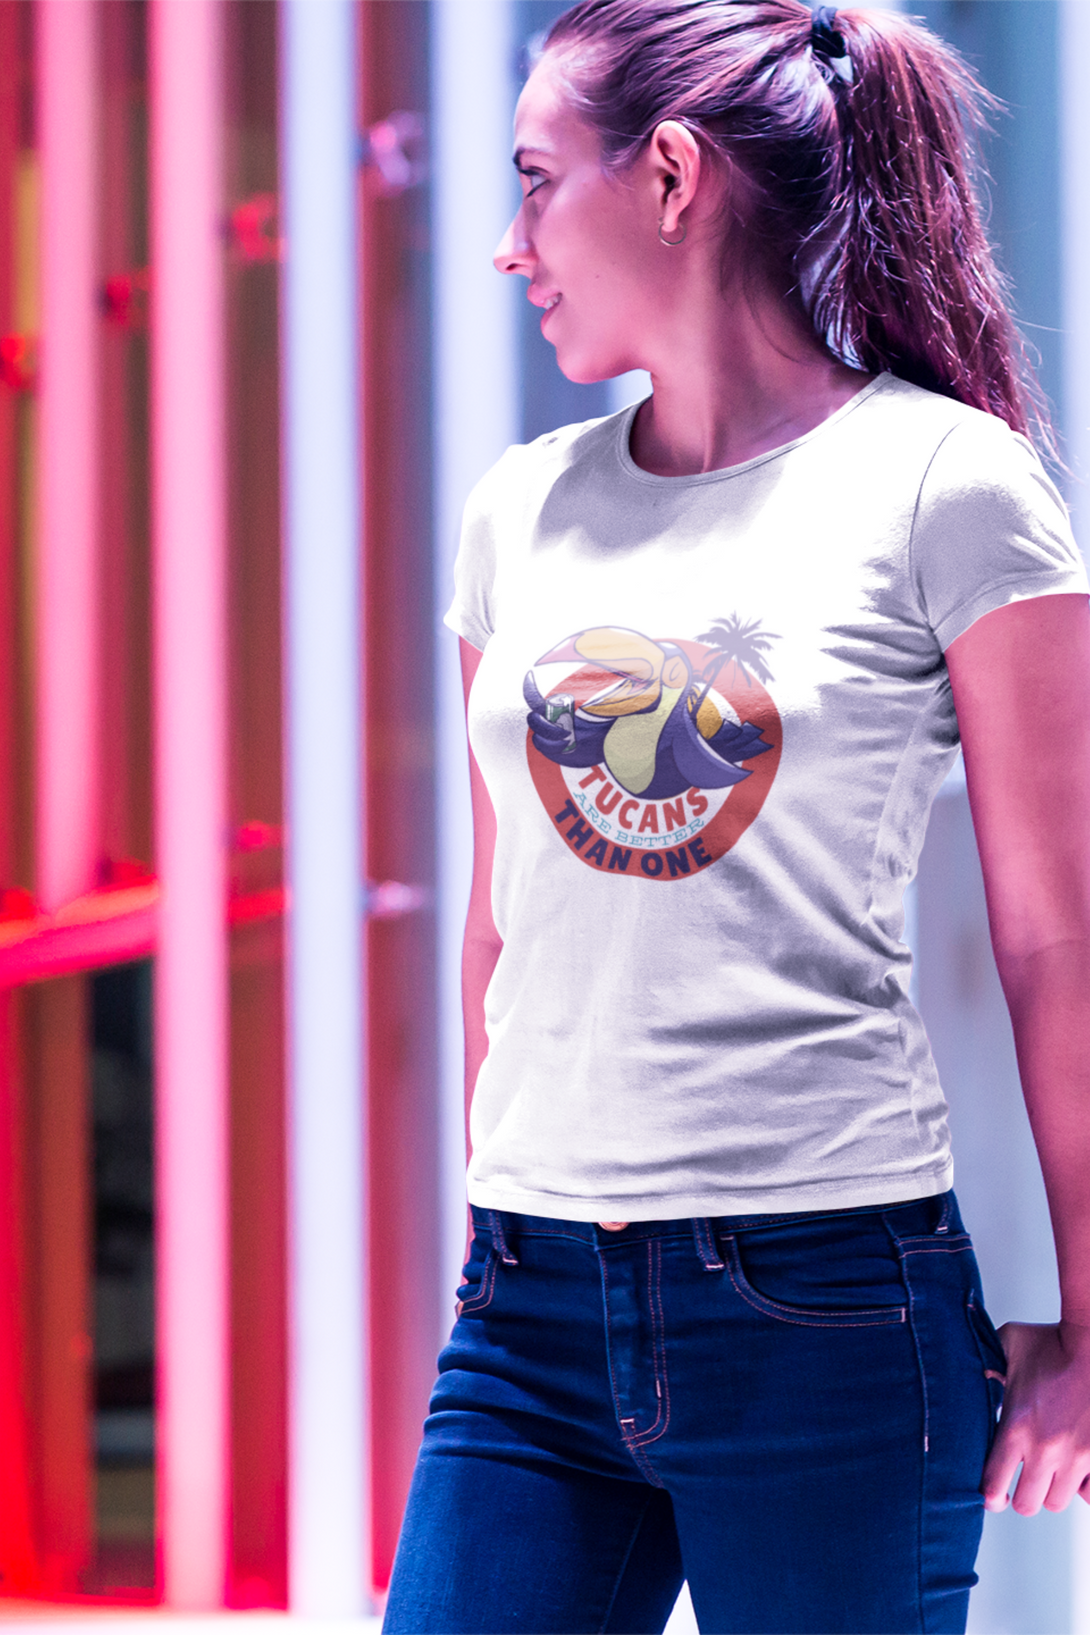 Tucans Are Better Tha One Printed T-Shirt For Women - WowWaves - 7